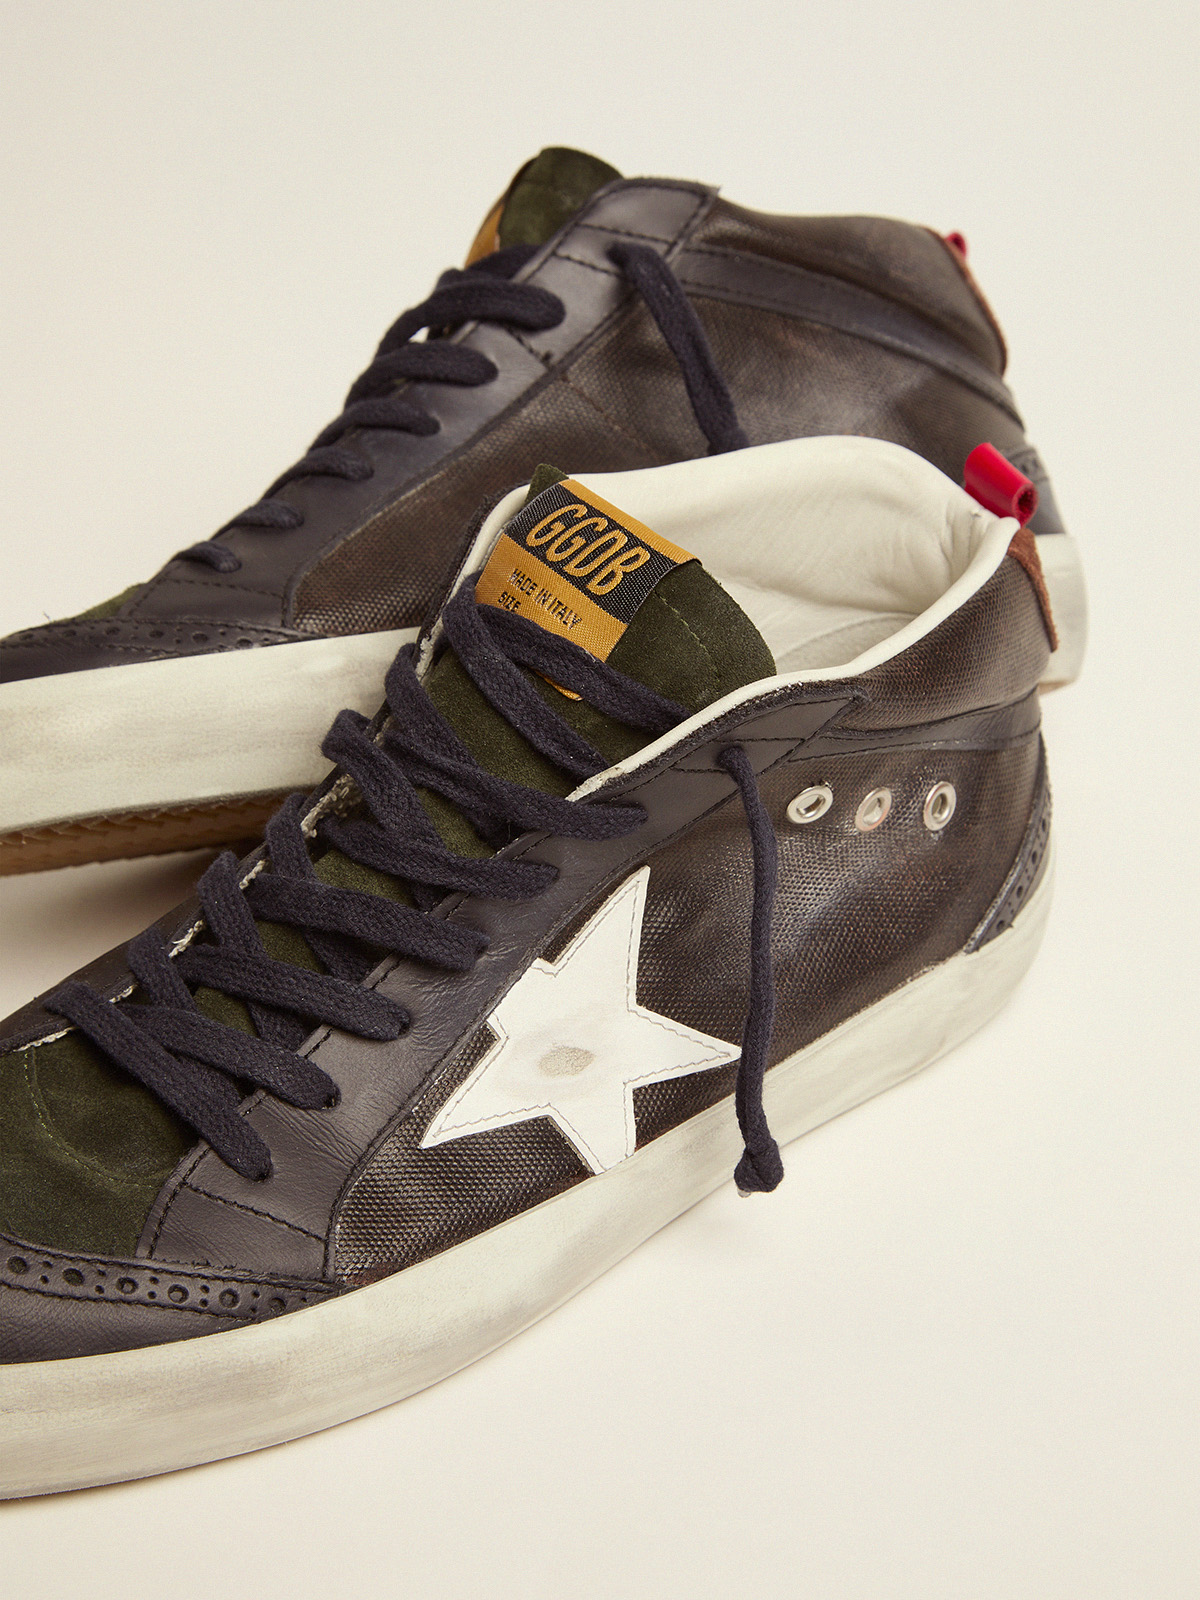 Mid Star sneakers in dark blue canvas with white leather star | Golden Goose